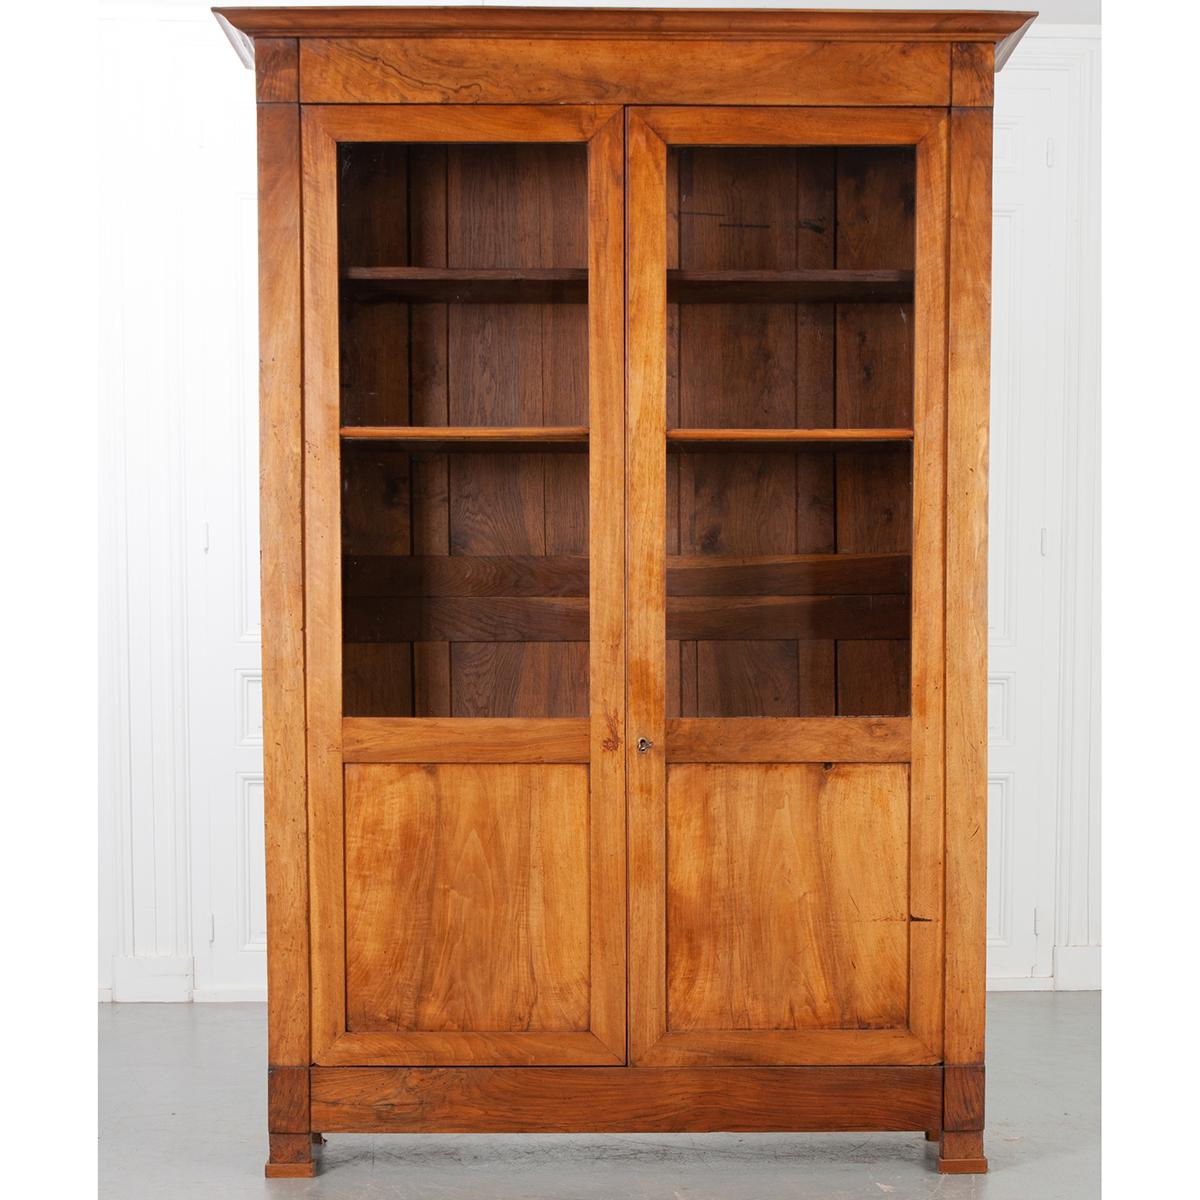 Great size! This is a French 19th century Louis Philippe mahogany bibliotheque. The grain of the mahogany wood is very interesting and has a wonderful patina. It has one key and a working lock. There are four adjustable shelves with a depth of 9-½”